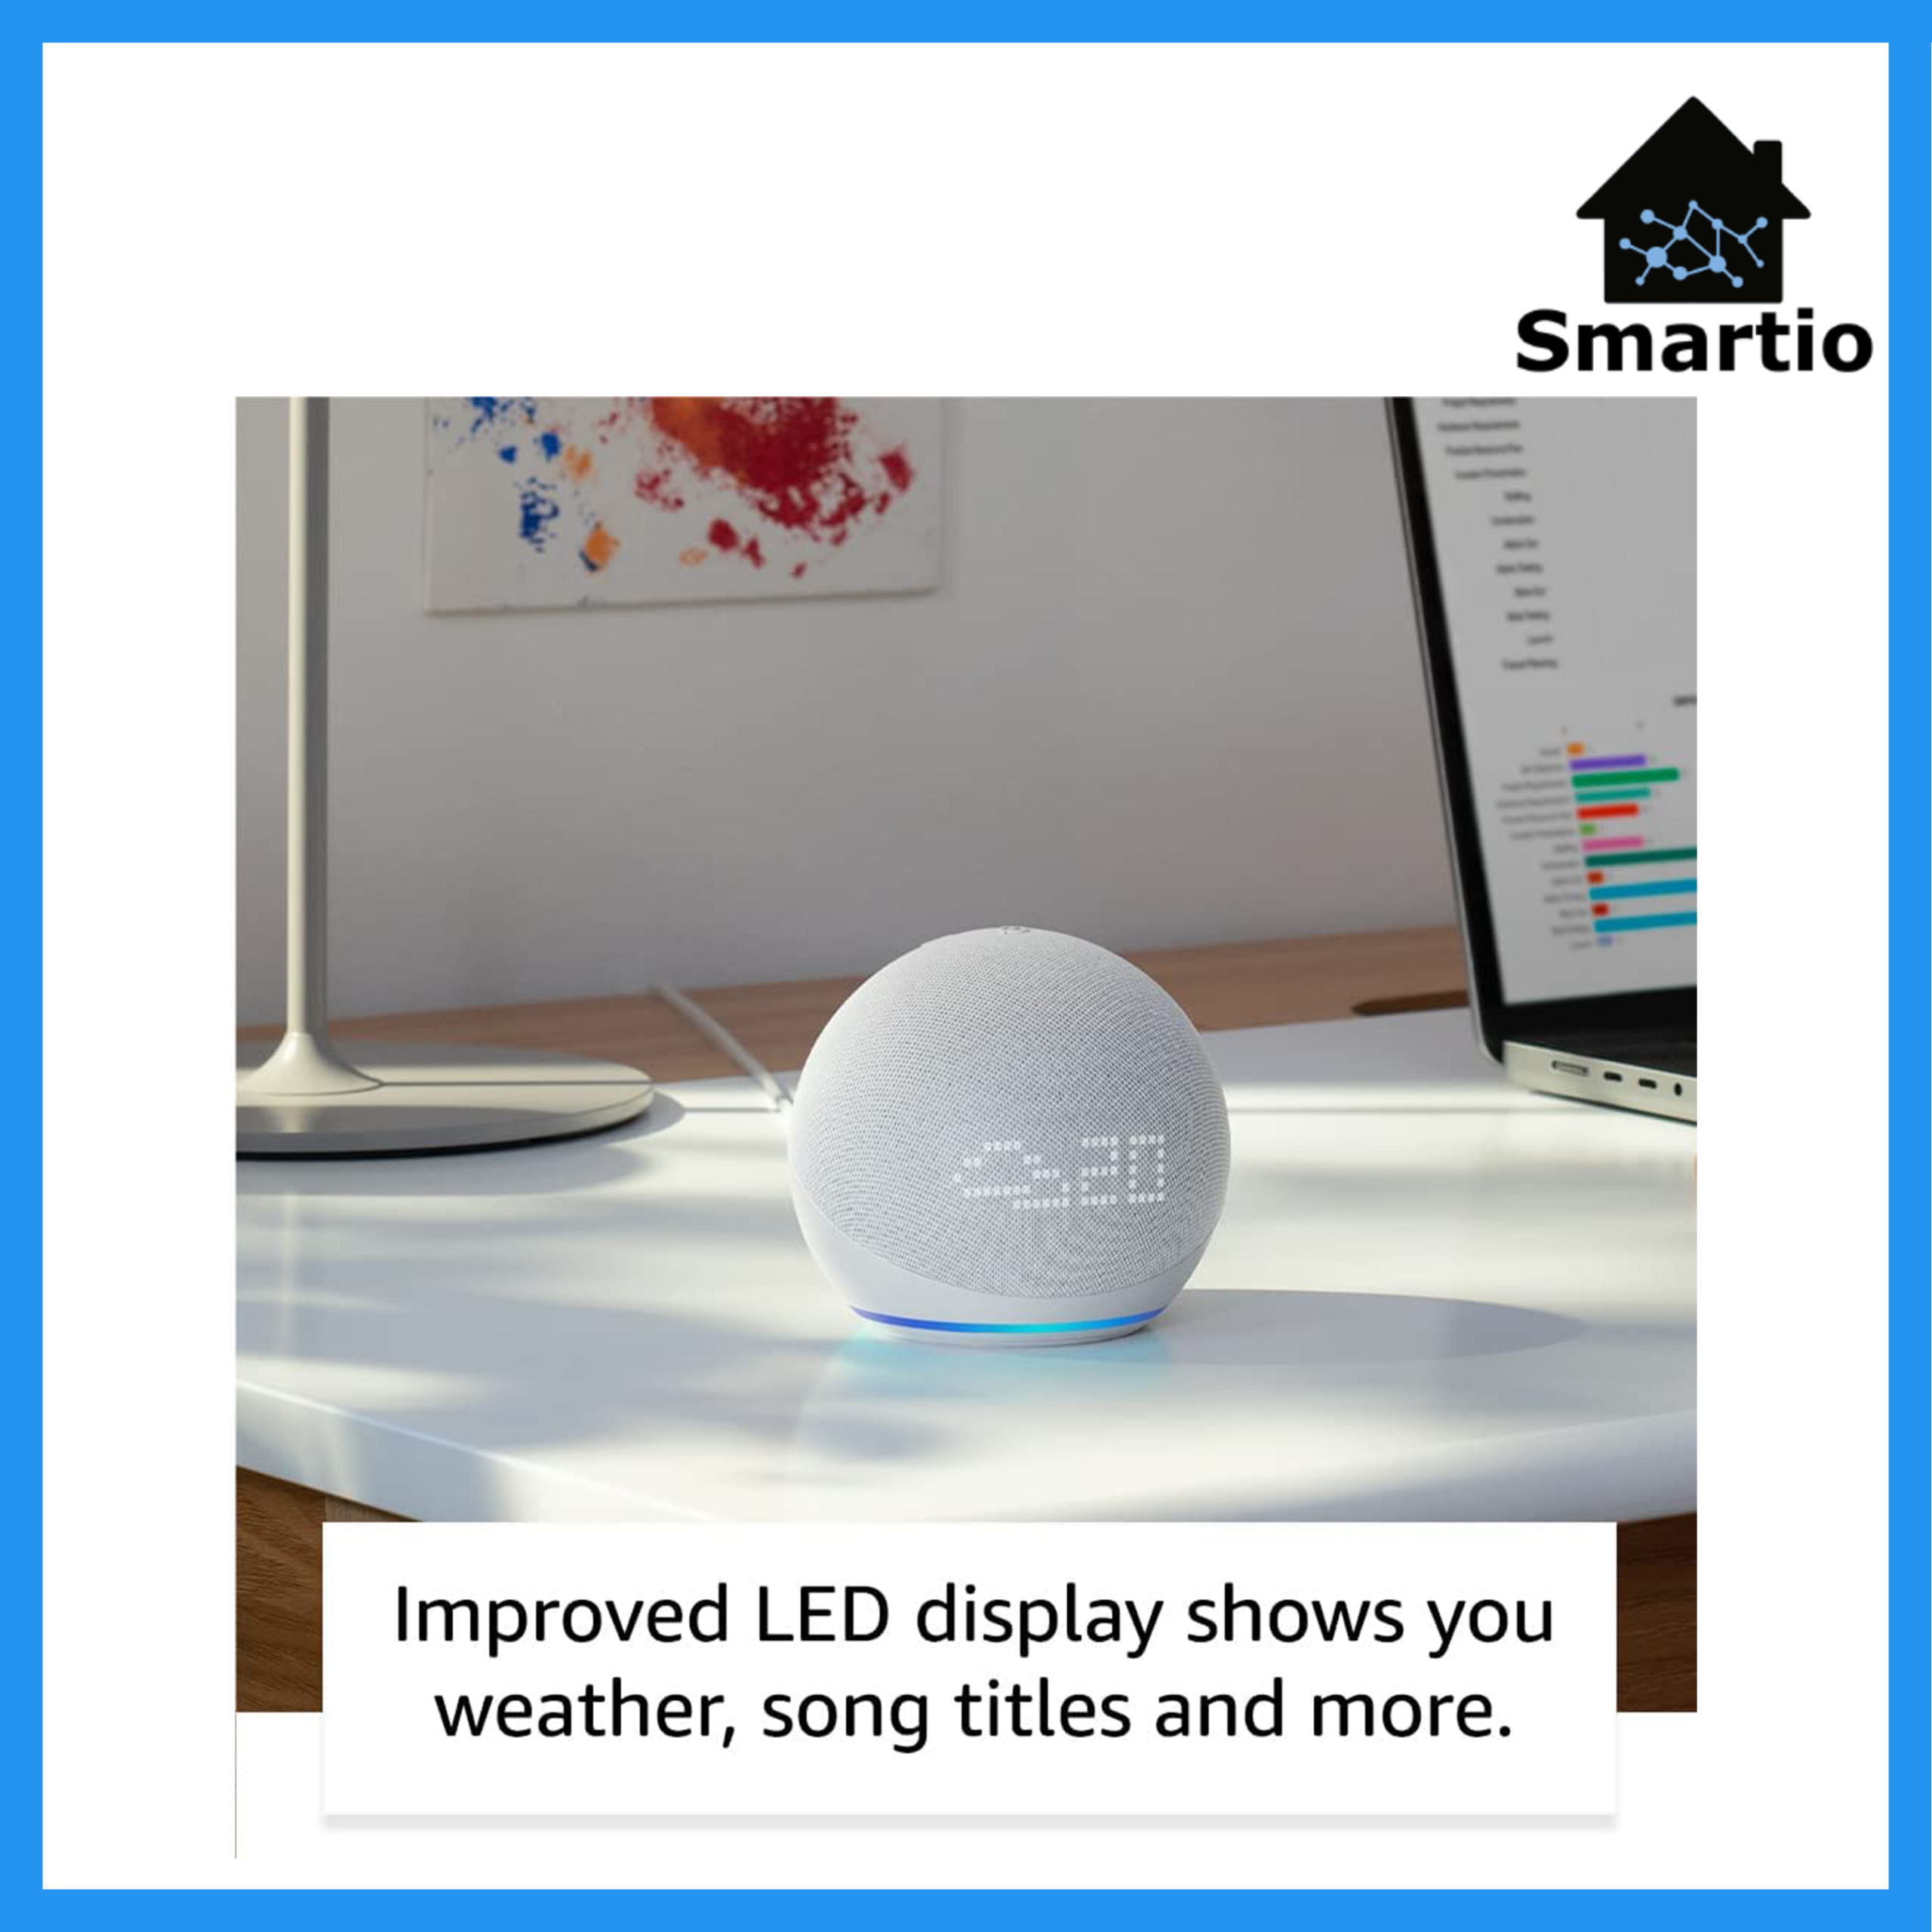 Echo Dot (5th Gen) with clock | Compact smart speaker with Alexa and  enhanced LED display for at-a-glance clock, timers, weather, and more 